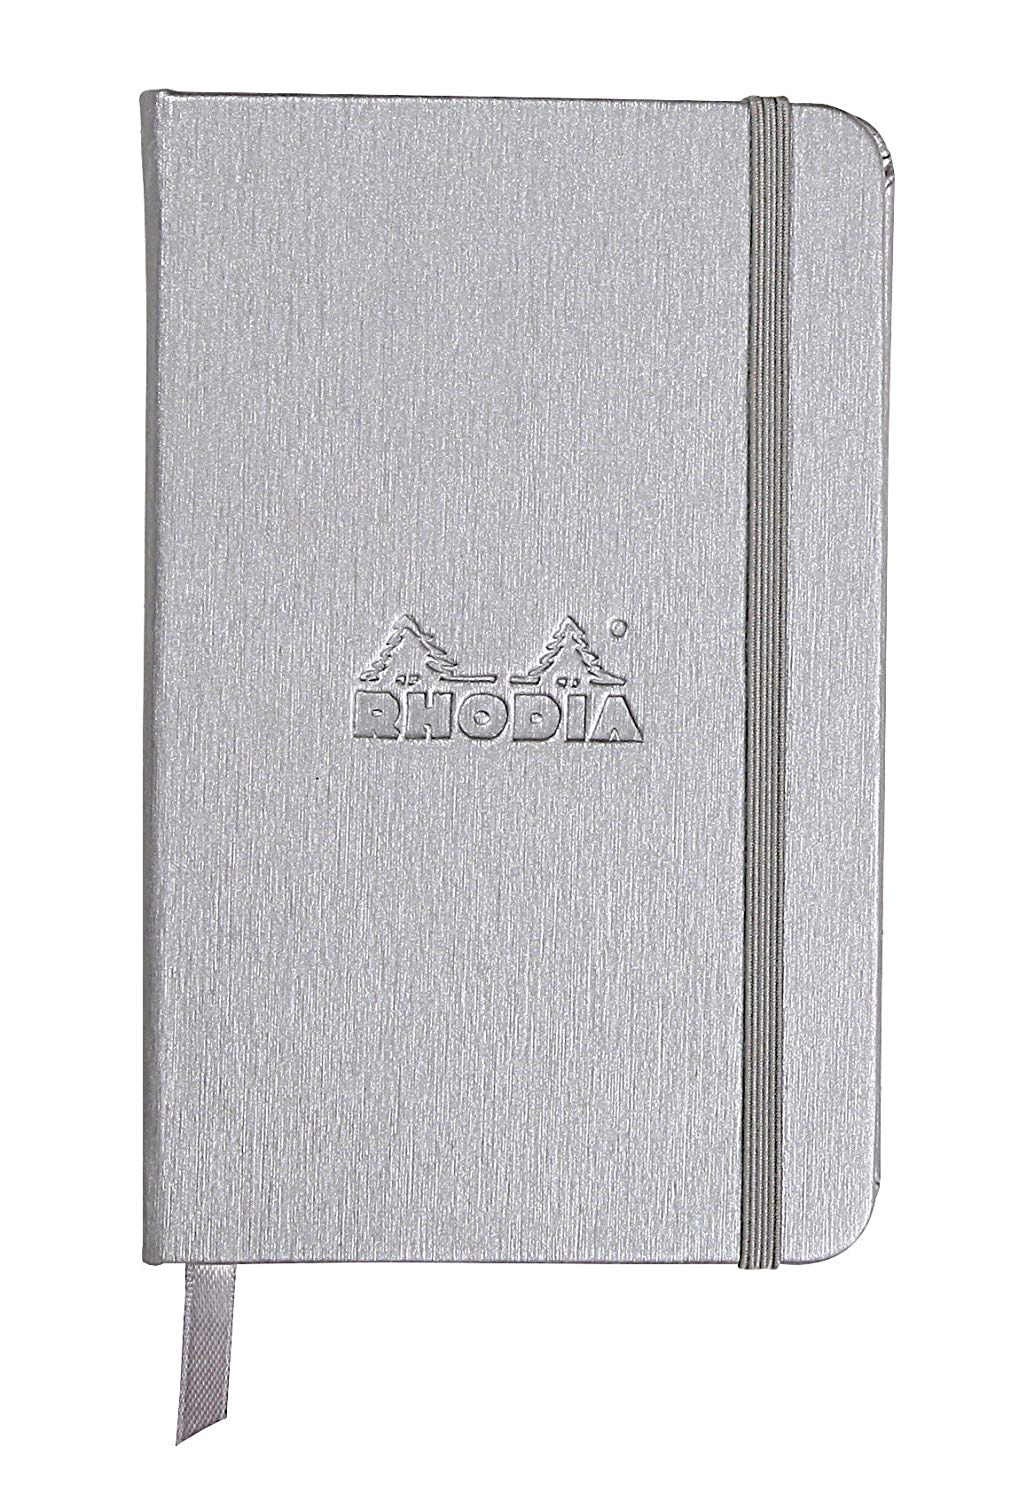 Rhodia - Boutique Webnotebooks Bound 3 1/2 x 5 1/2 Lined Silver 96 Sheets (A6) | 118067 | Pen Place